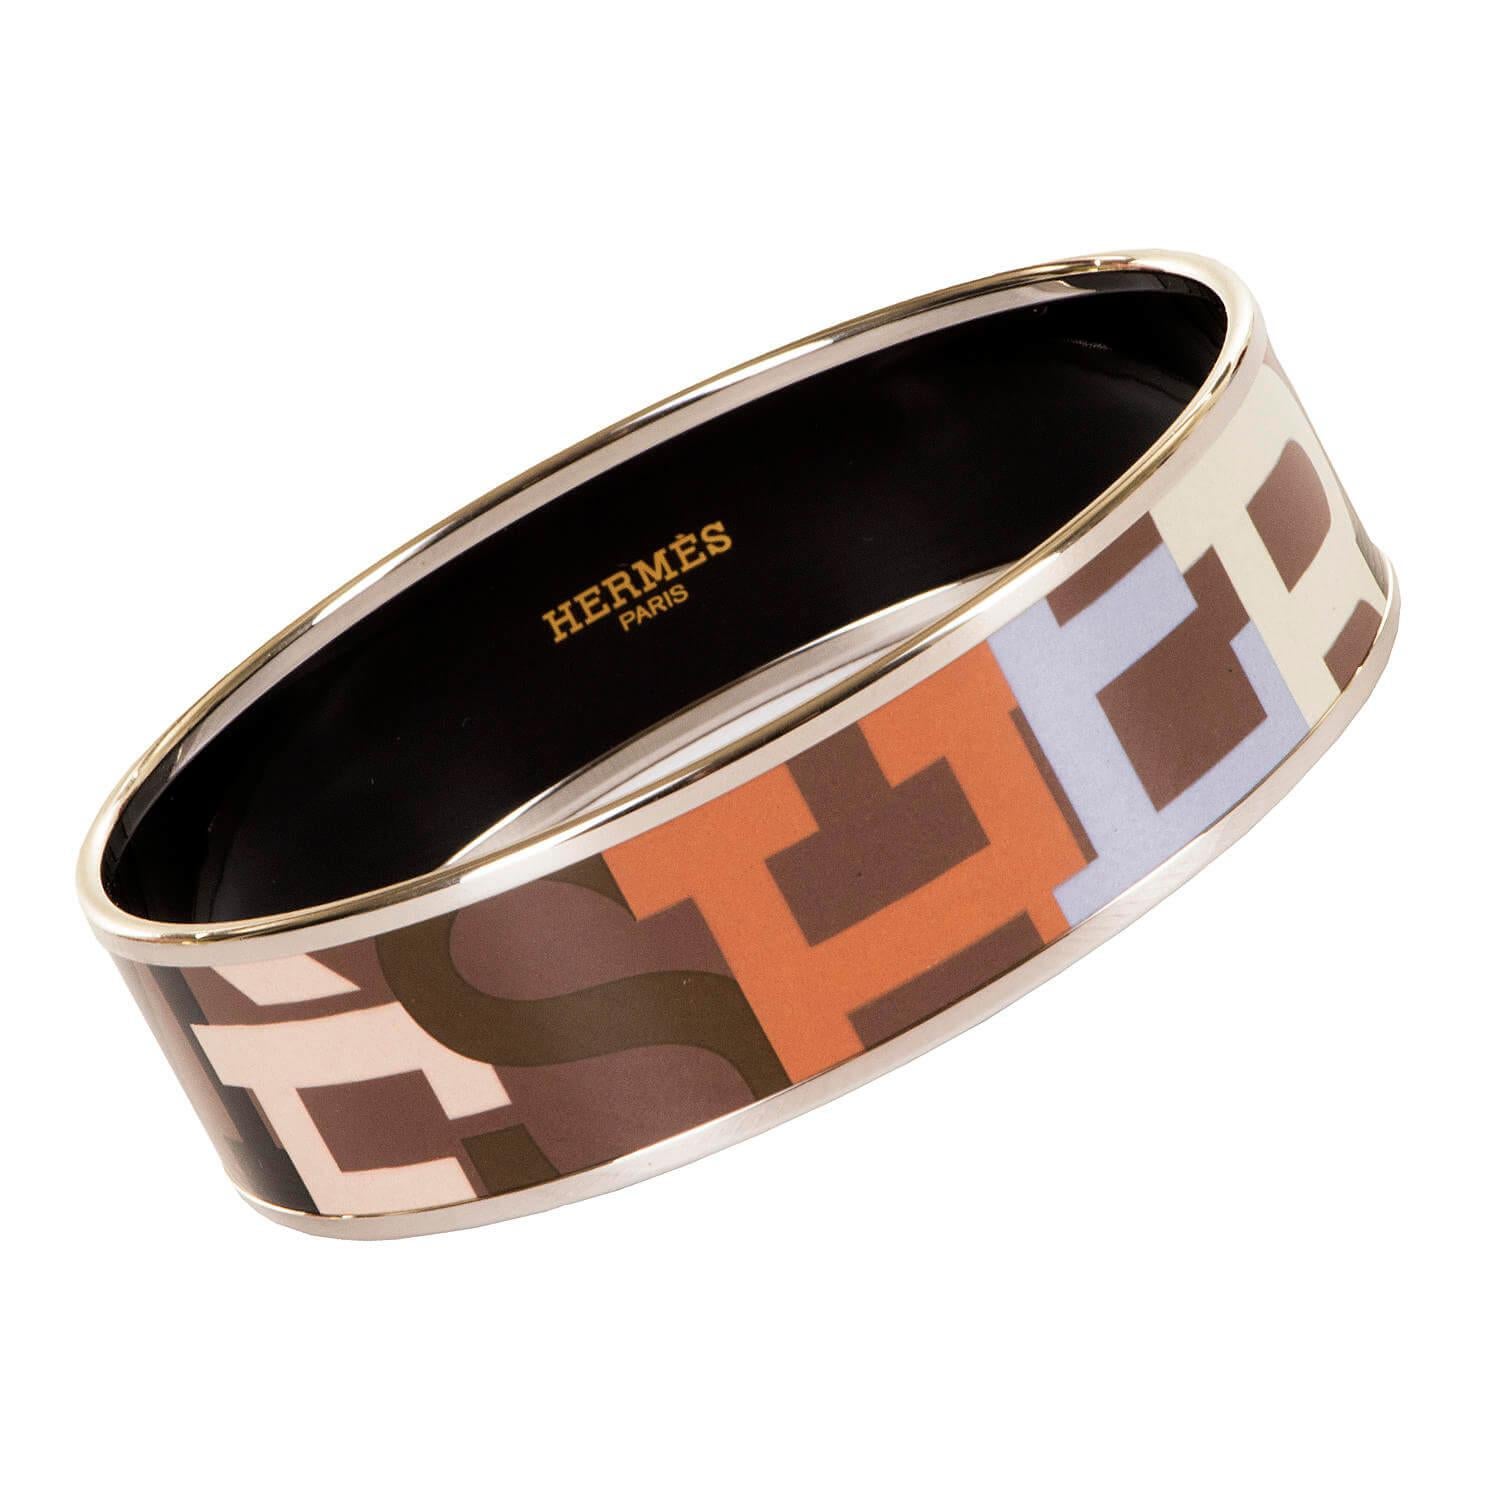 In perfect unused condition, this exquisite Hermes 'Signature' Bangle, is signed and comes with it's original Hermes protective pouch.
